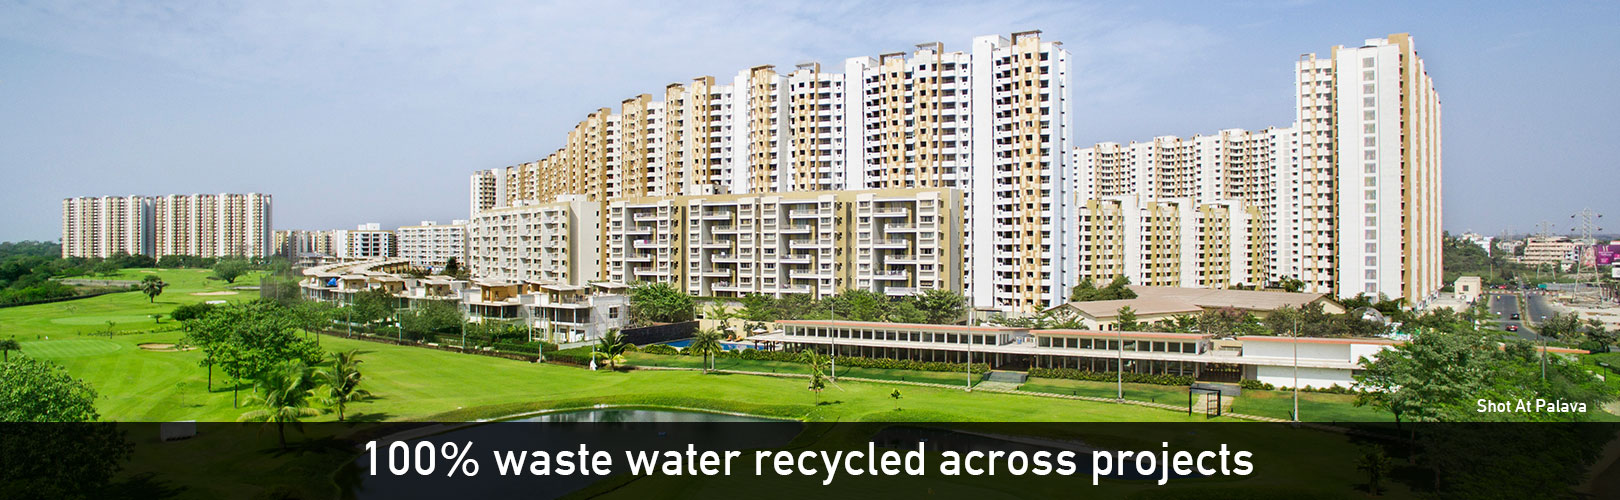 Waste water recycleing at Lodha Projects